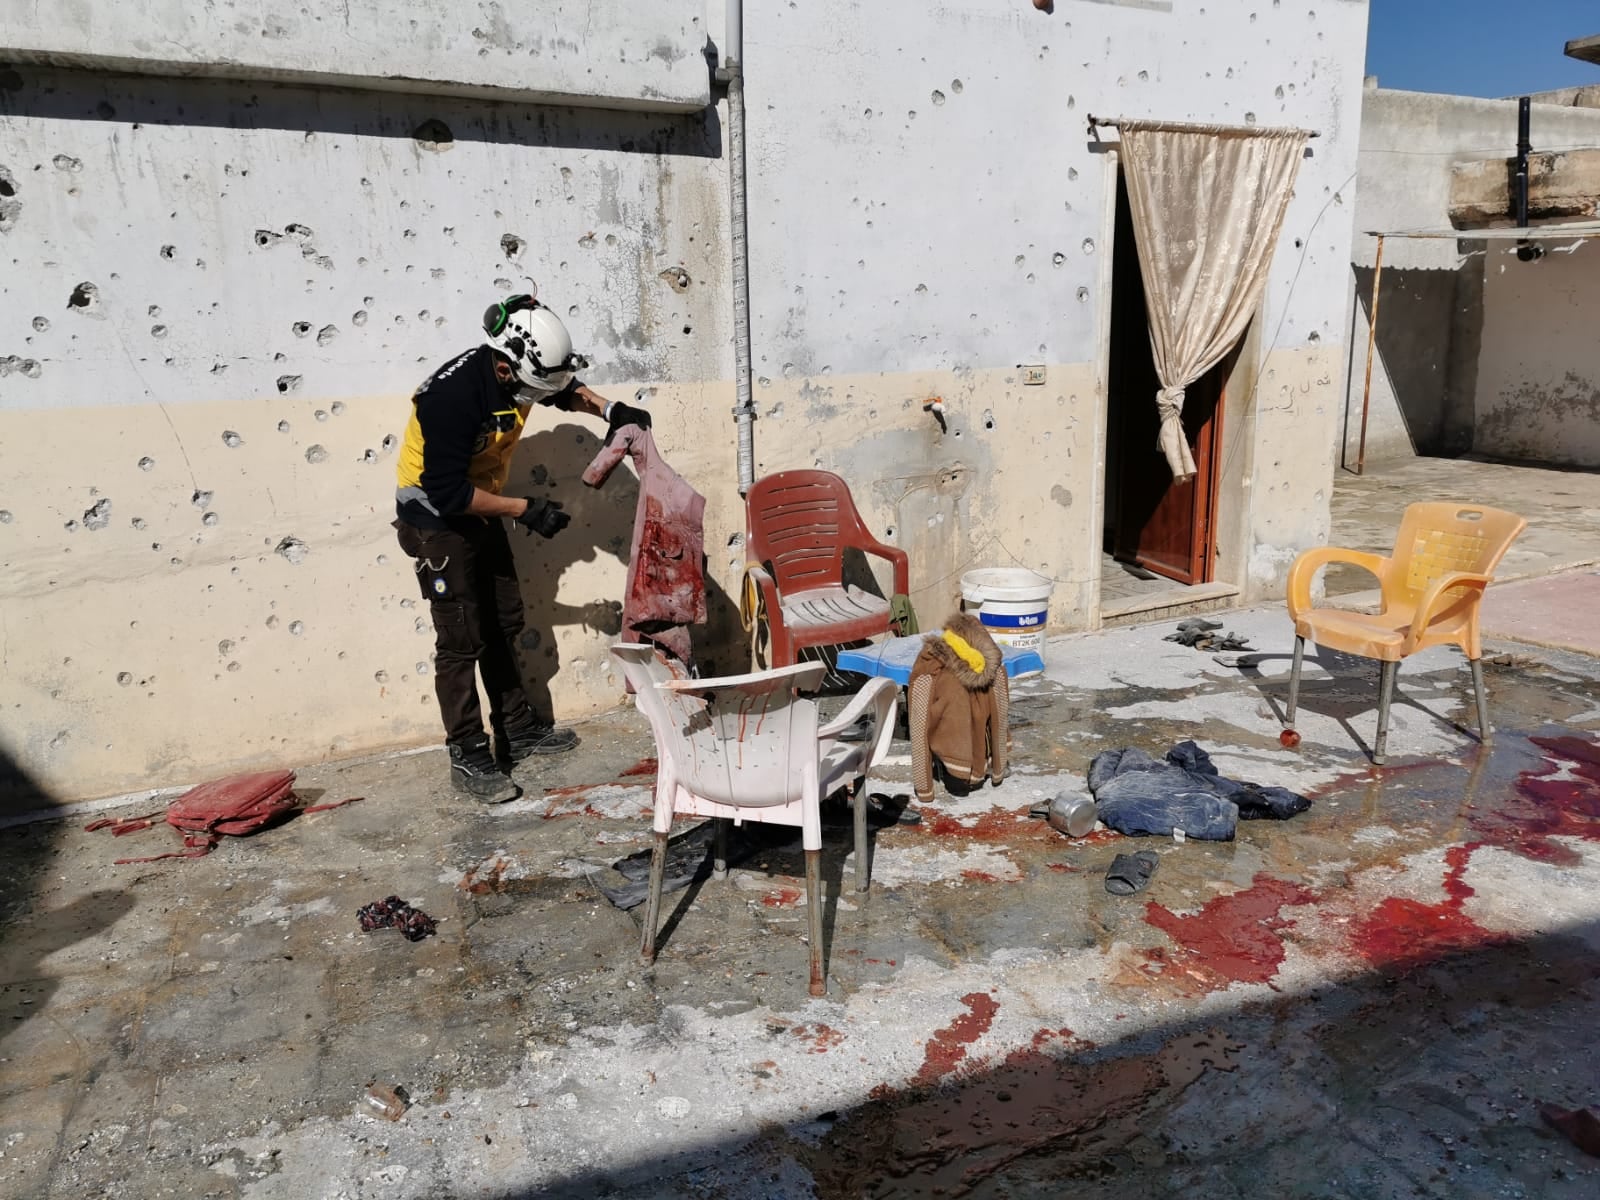 blood stains and damages at the site of massacre in Idlib in Syria 12-2-2022